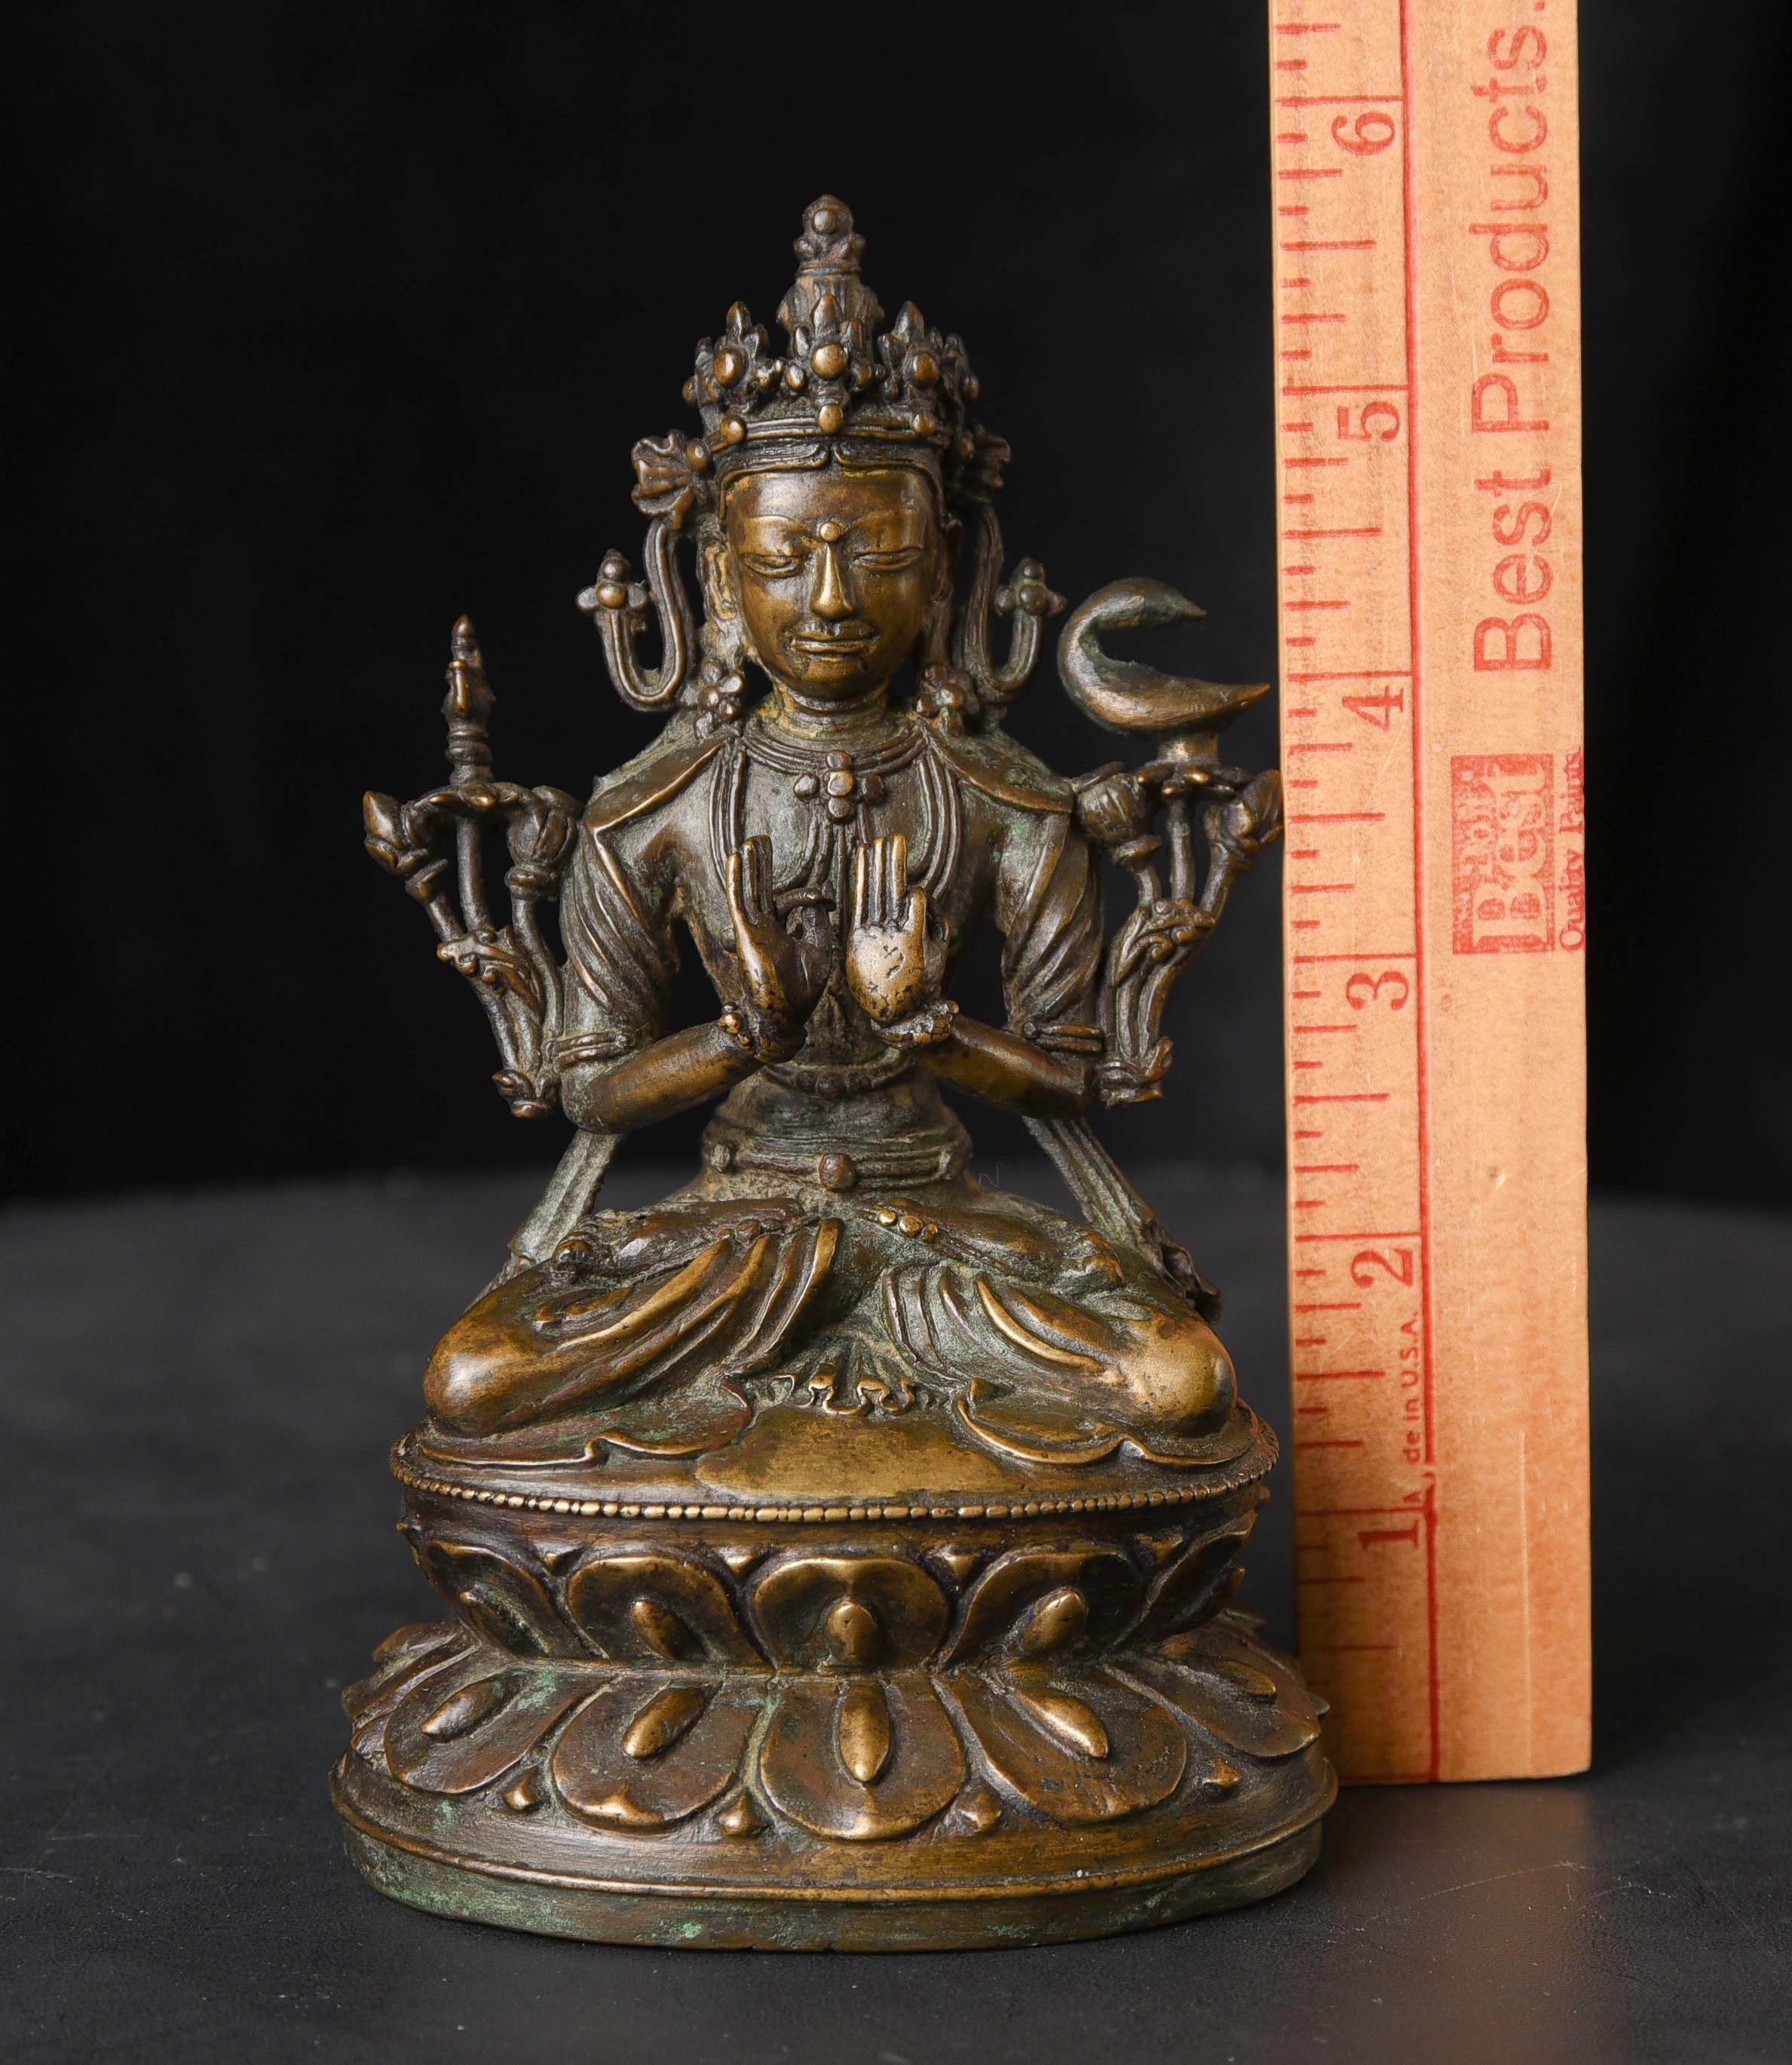 13/14th century Tibetan Bronze Buddha/Bodhisattva . Superb example- finely cast, beautifully sculpted, with a beautiful untouched non-guilt patina Note the way it radiates a powerful spiritual potency. Every bit of it is meticulously finished- look